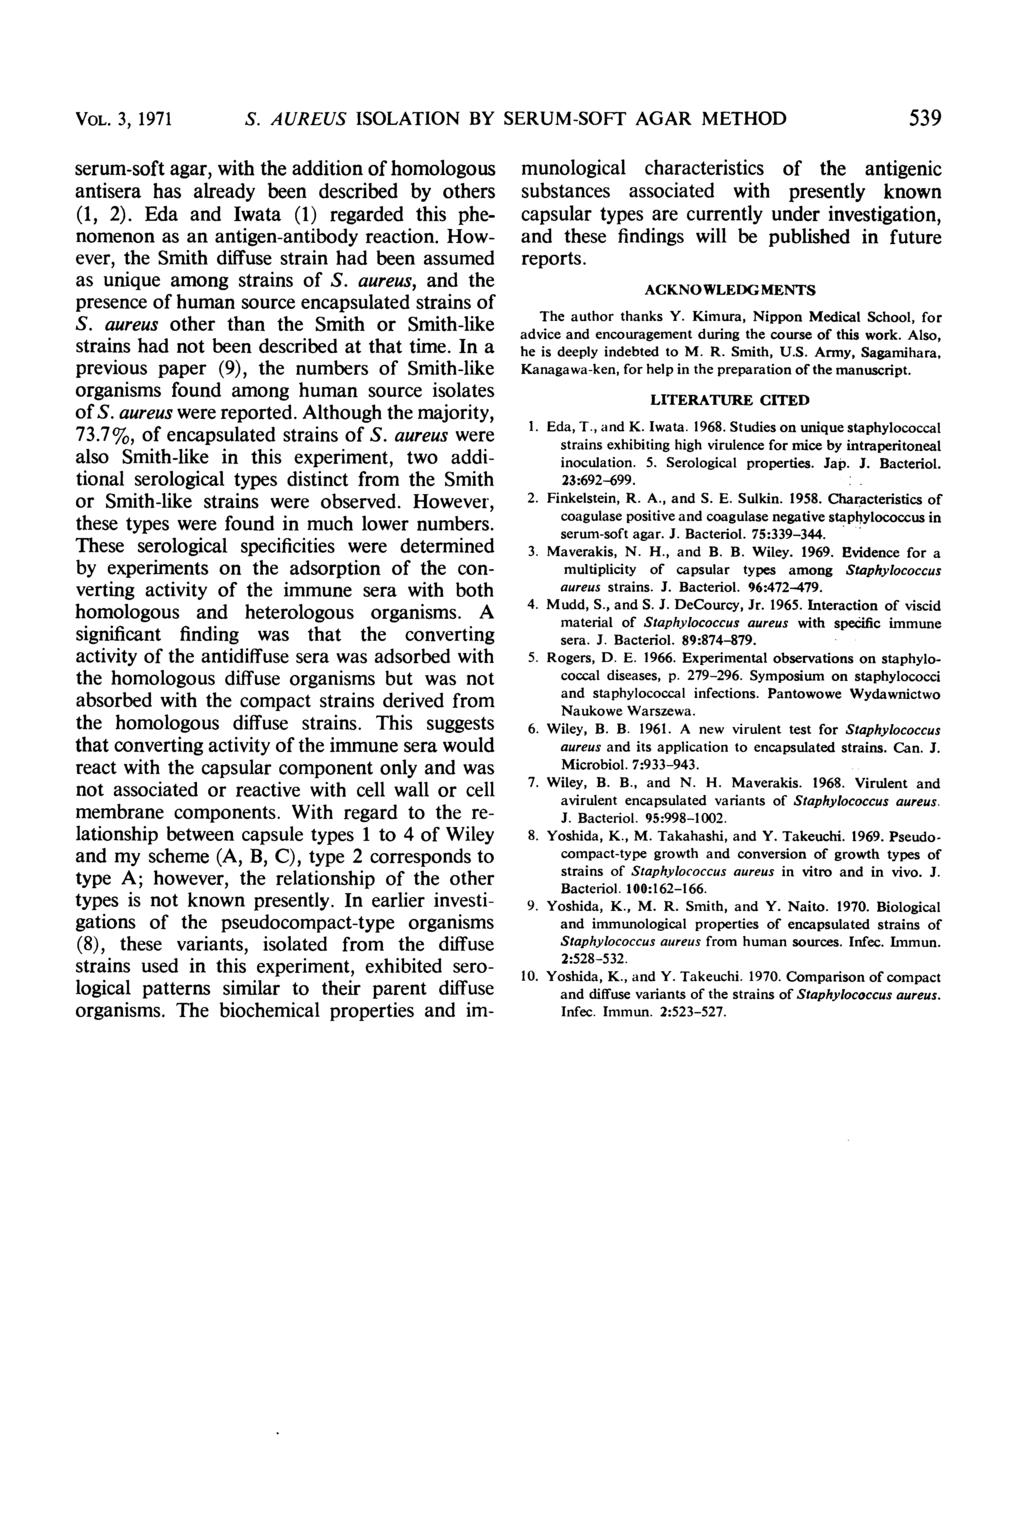 VOL. 3, 1971 S. AUREUS ISOLATION BY SERUM-SOFT AGAR METHOD 539 serum-soft agar, with the addition of homologous antisera has already been described by others (1, 2).